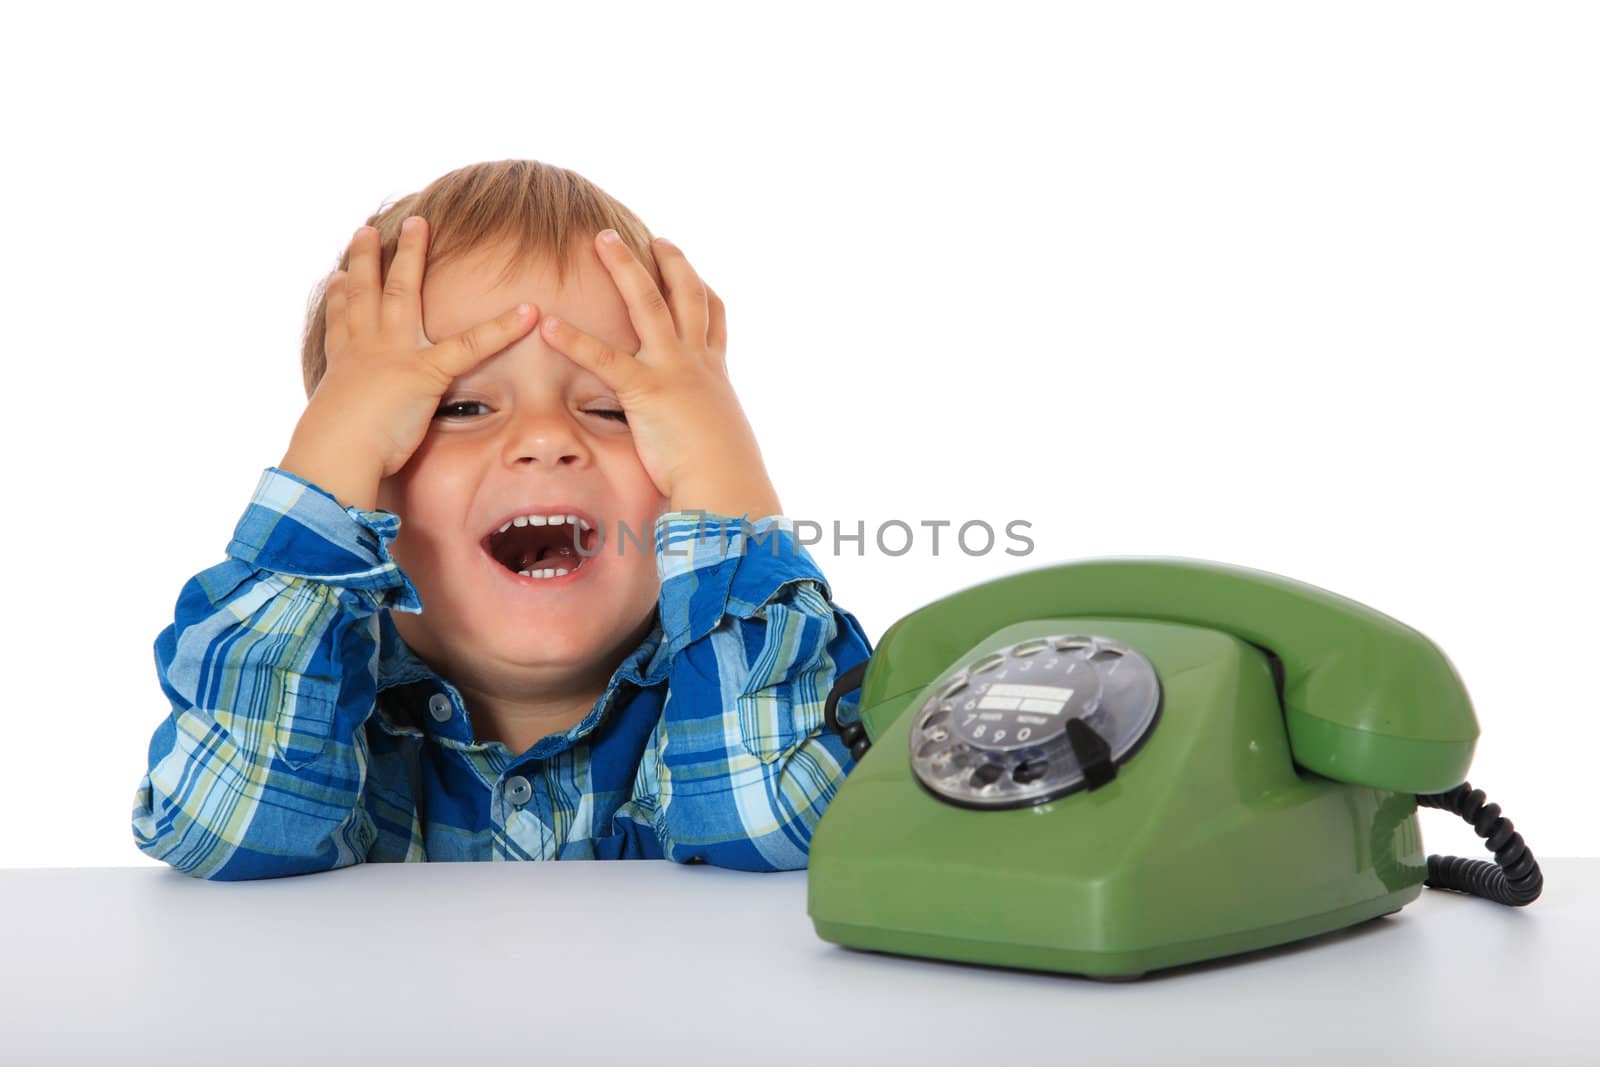 Cute caucasian boy using telephone. All on white background.